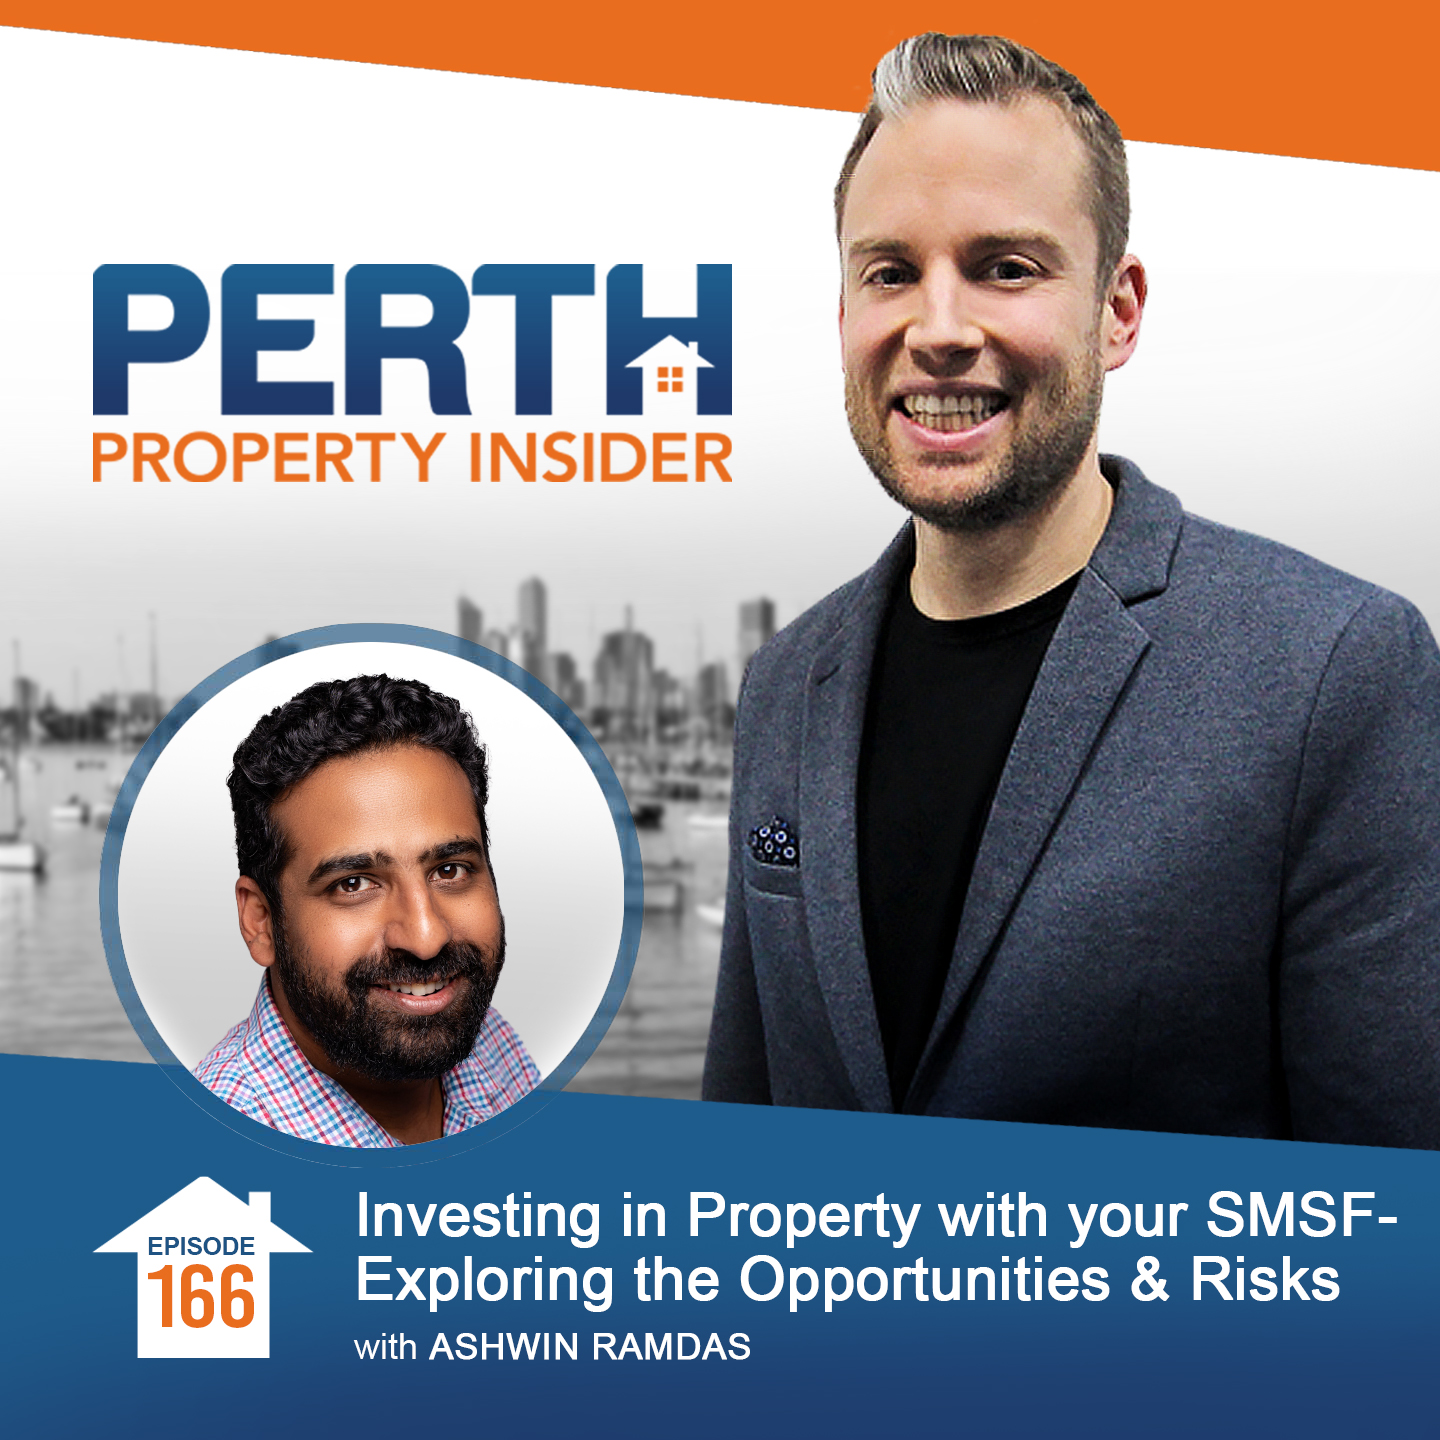 Investing in Property with your SMSF- Exploring the Opportunities & Risks